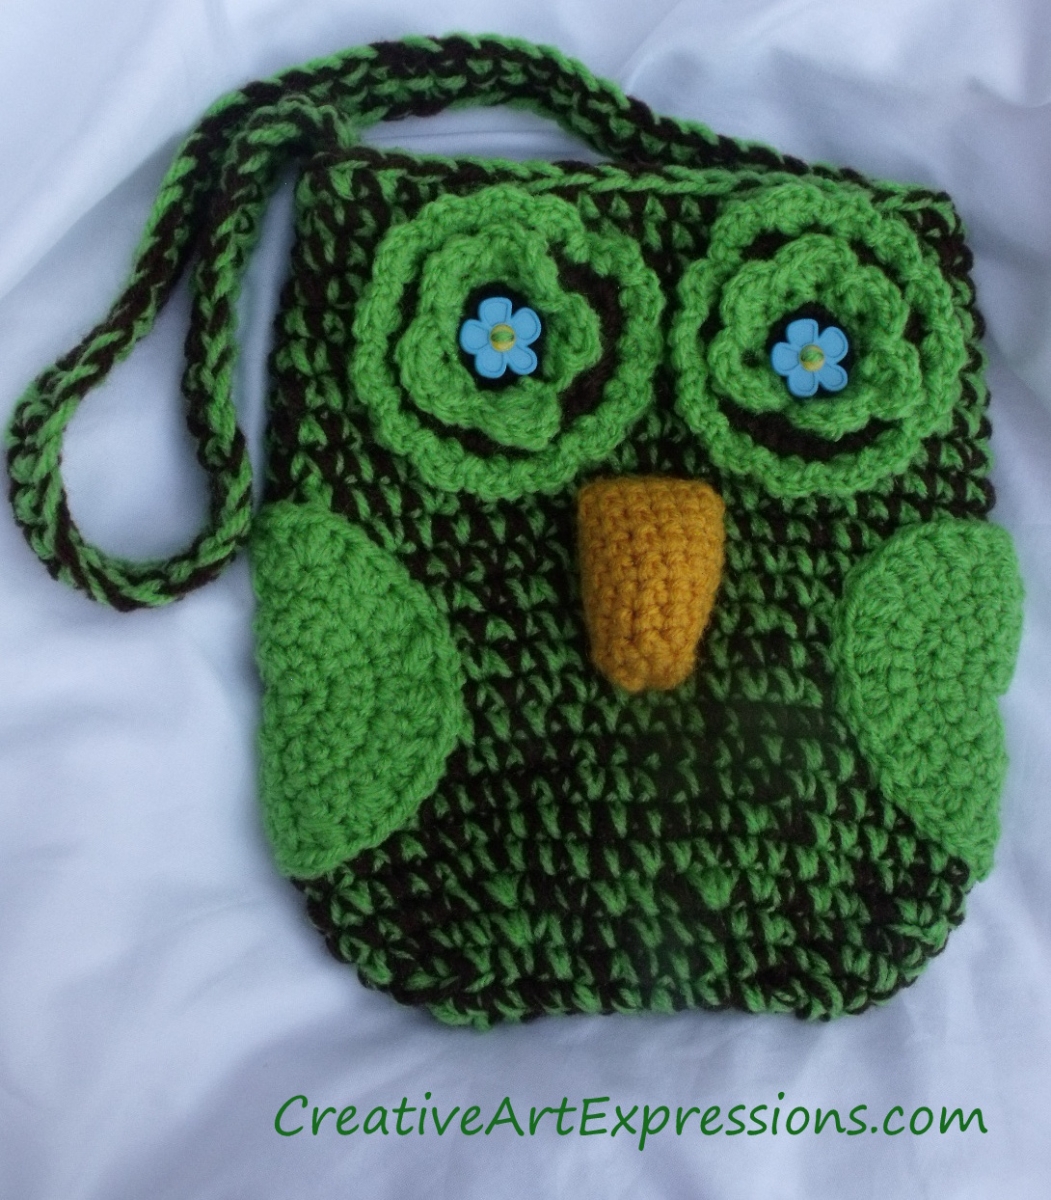 Creative Art Expressions hand Crocheted Green & Brown Owl Purse